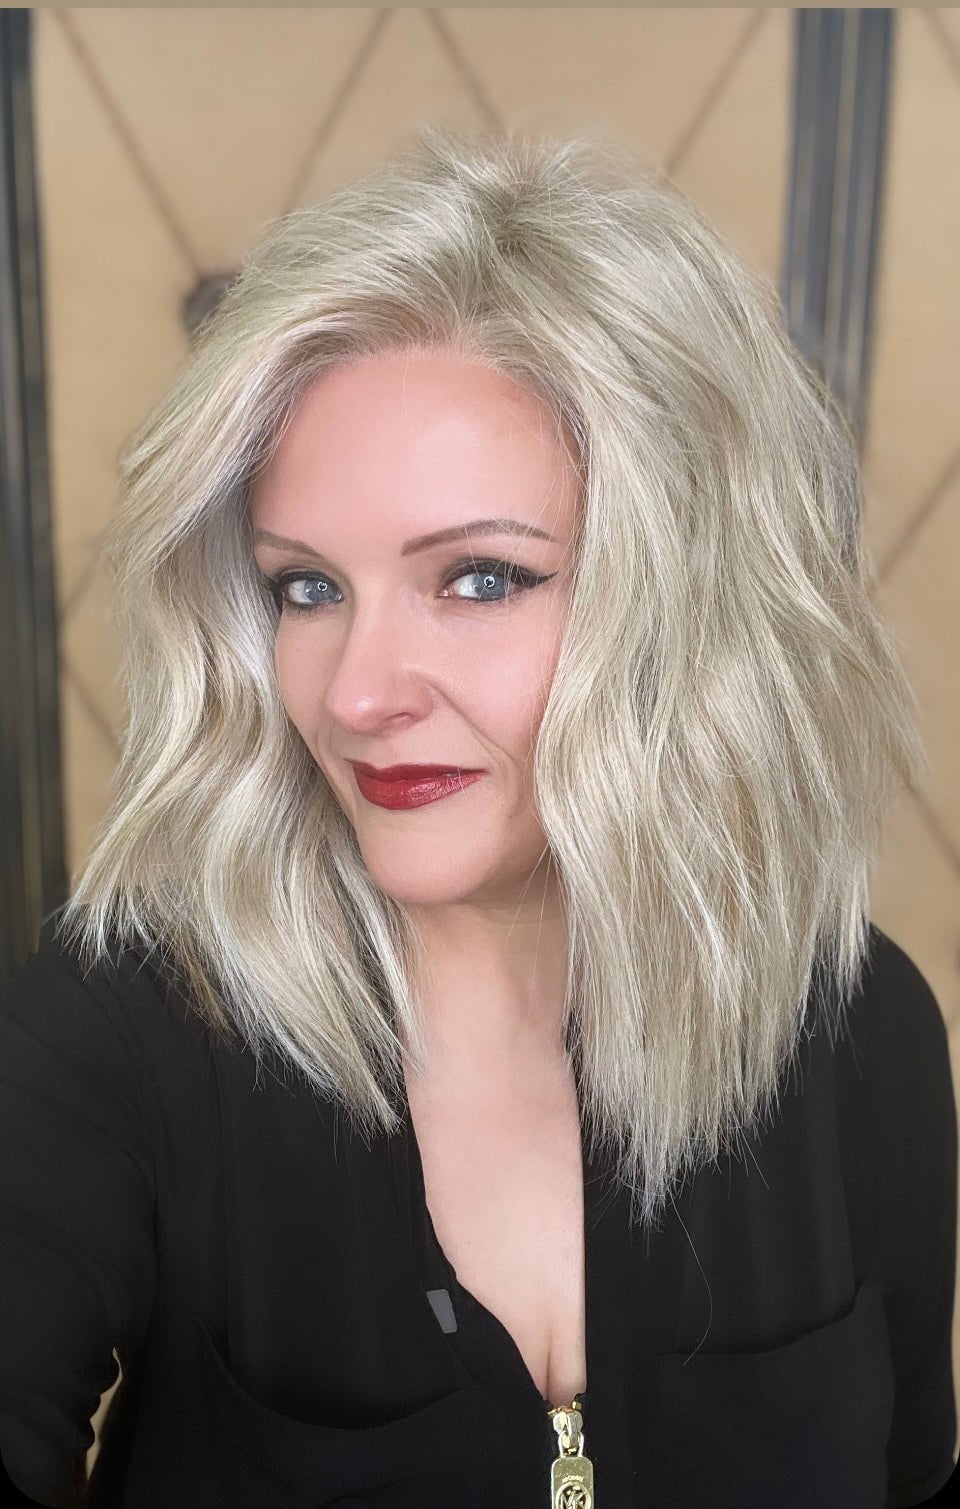 Marcie Mertz @wig.obsessed wearing BIG SPENDER by RAQUEL WELCH WIGS in color RL19/23 BISCUIT | Light Ash Blonde Evenly Blended with Cool Platinum Blonde